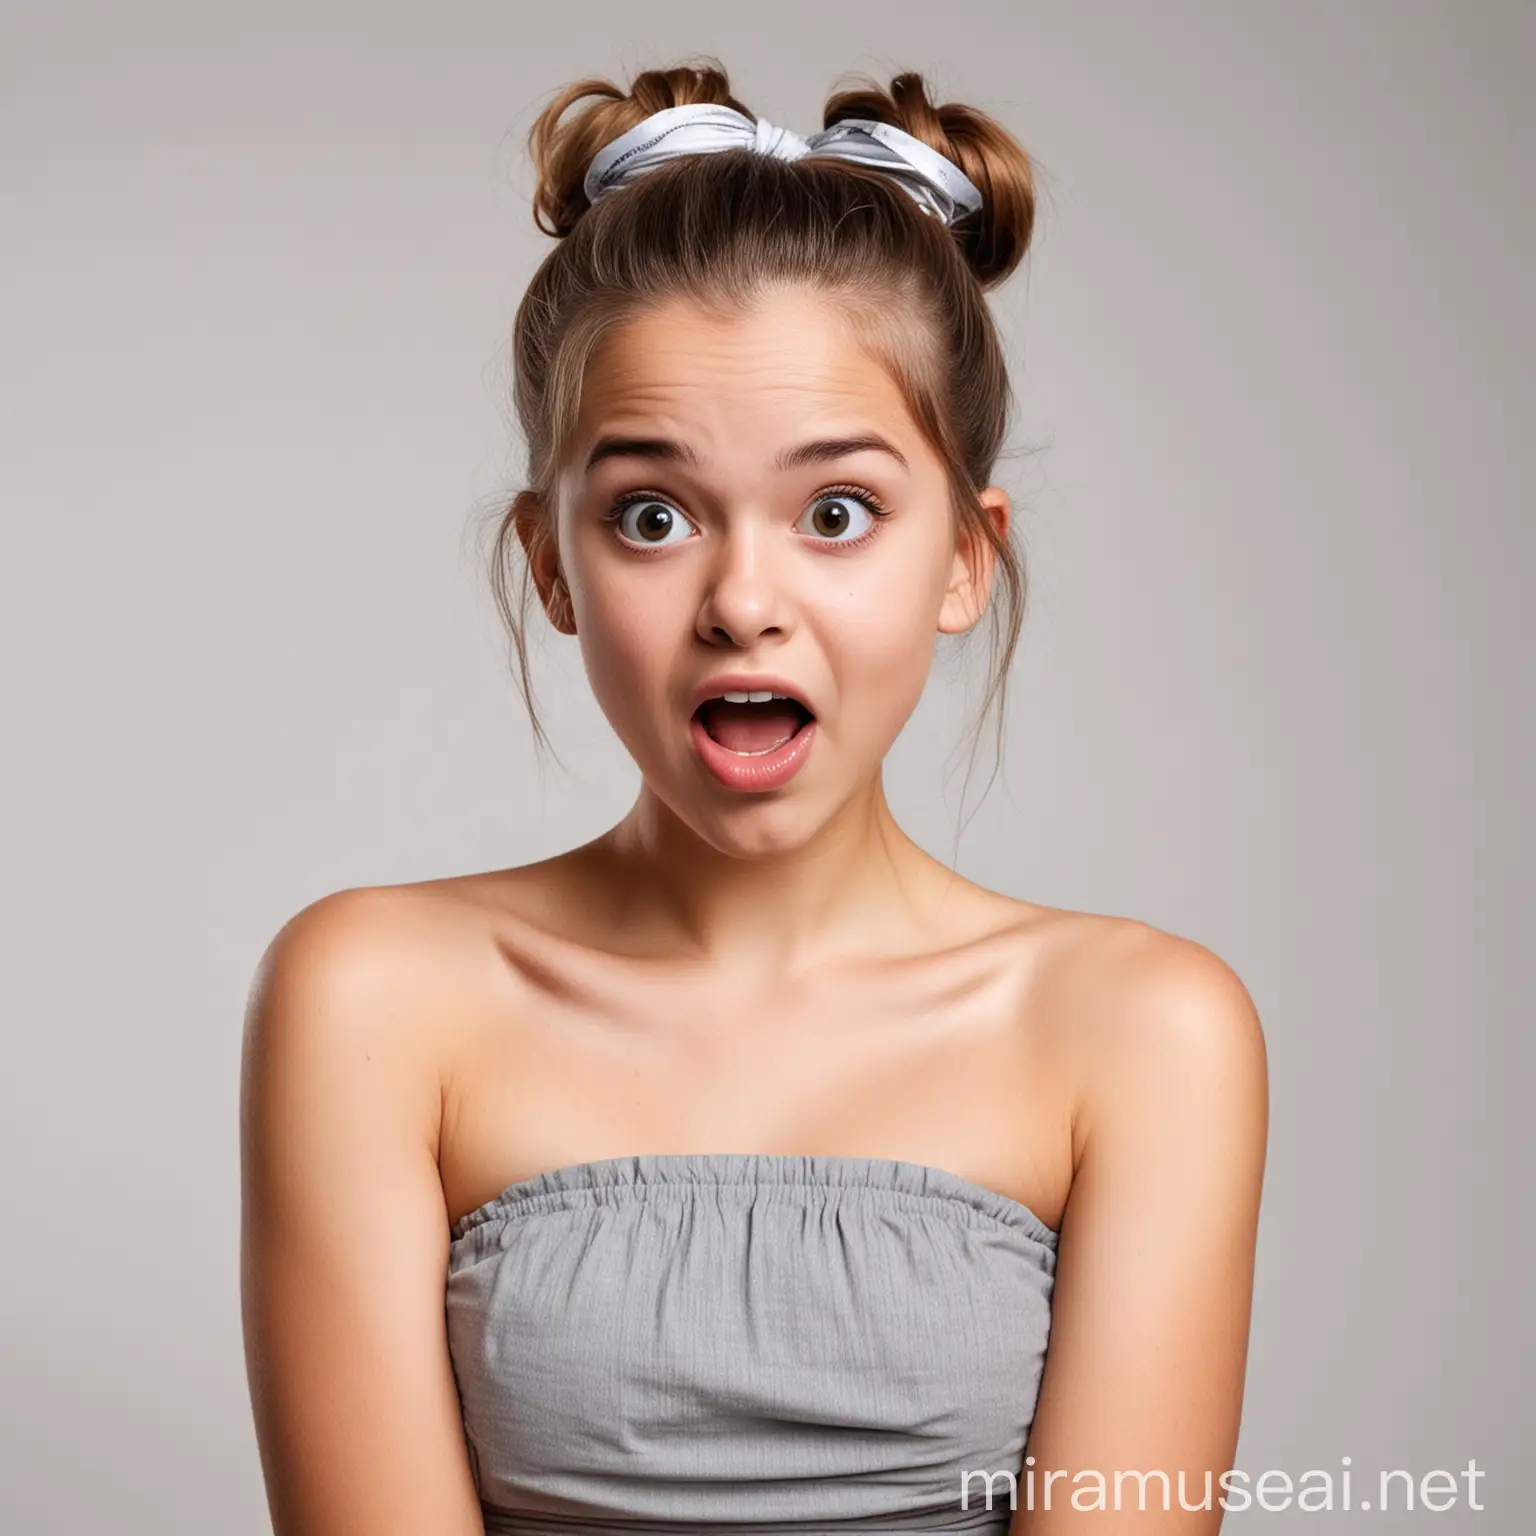 Surprised Girl in Strapless Top on White Background